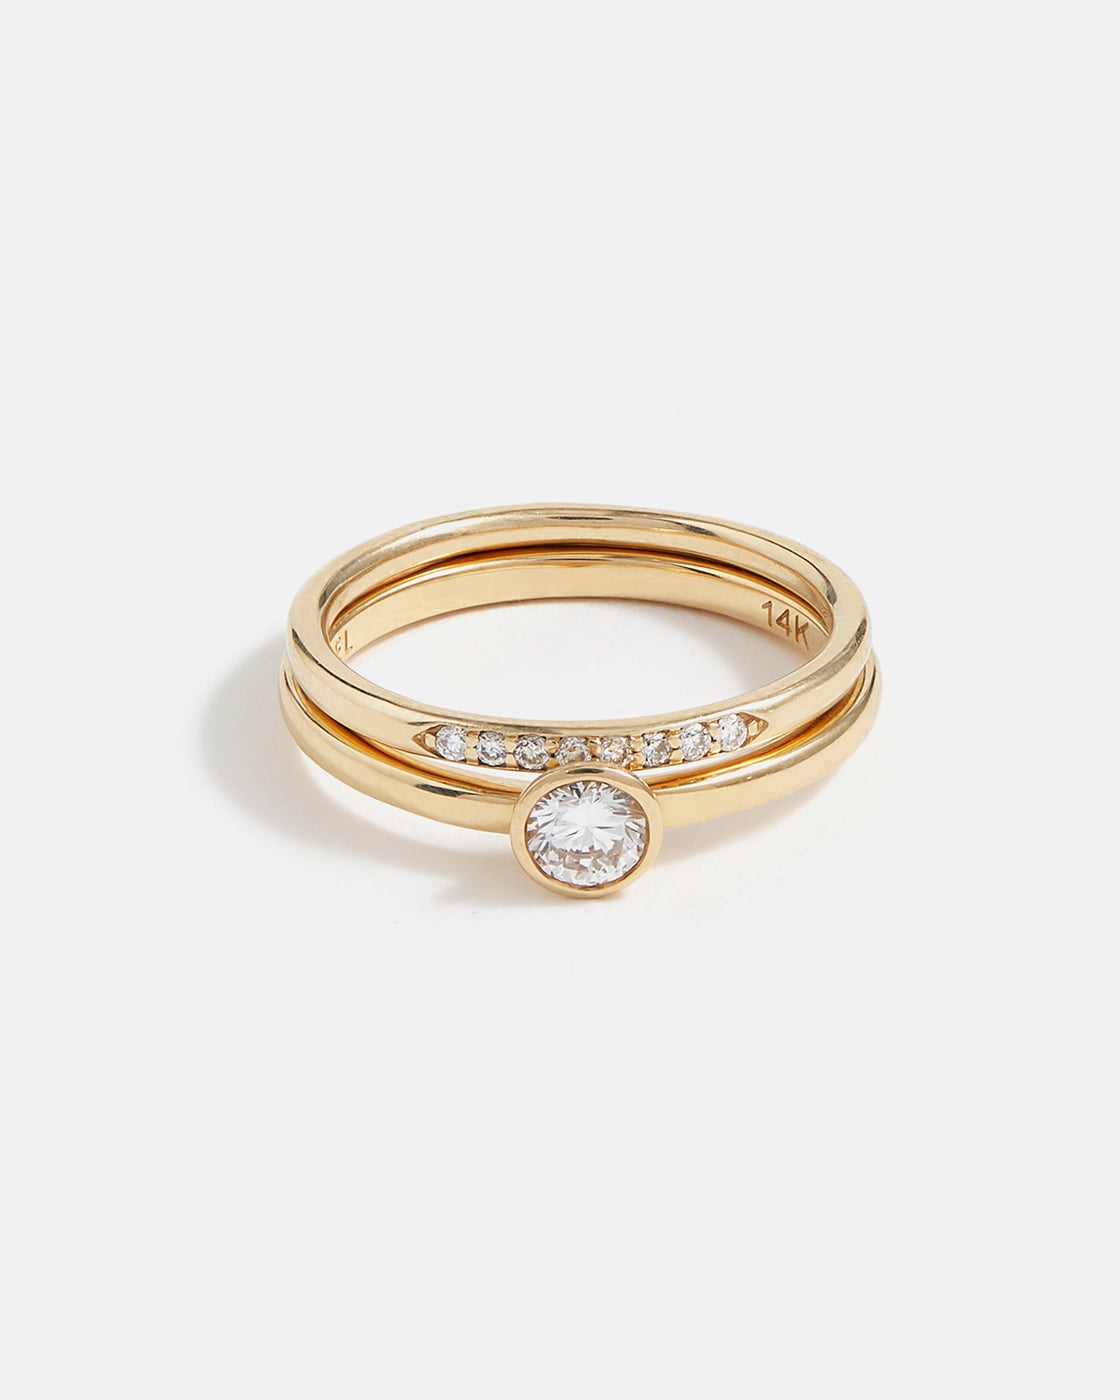 Origines Solitaire Ring and Stratura Band in Yellow Gold with Lab-Grown Diamonds